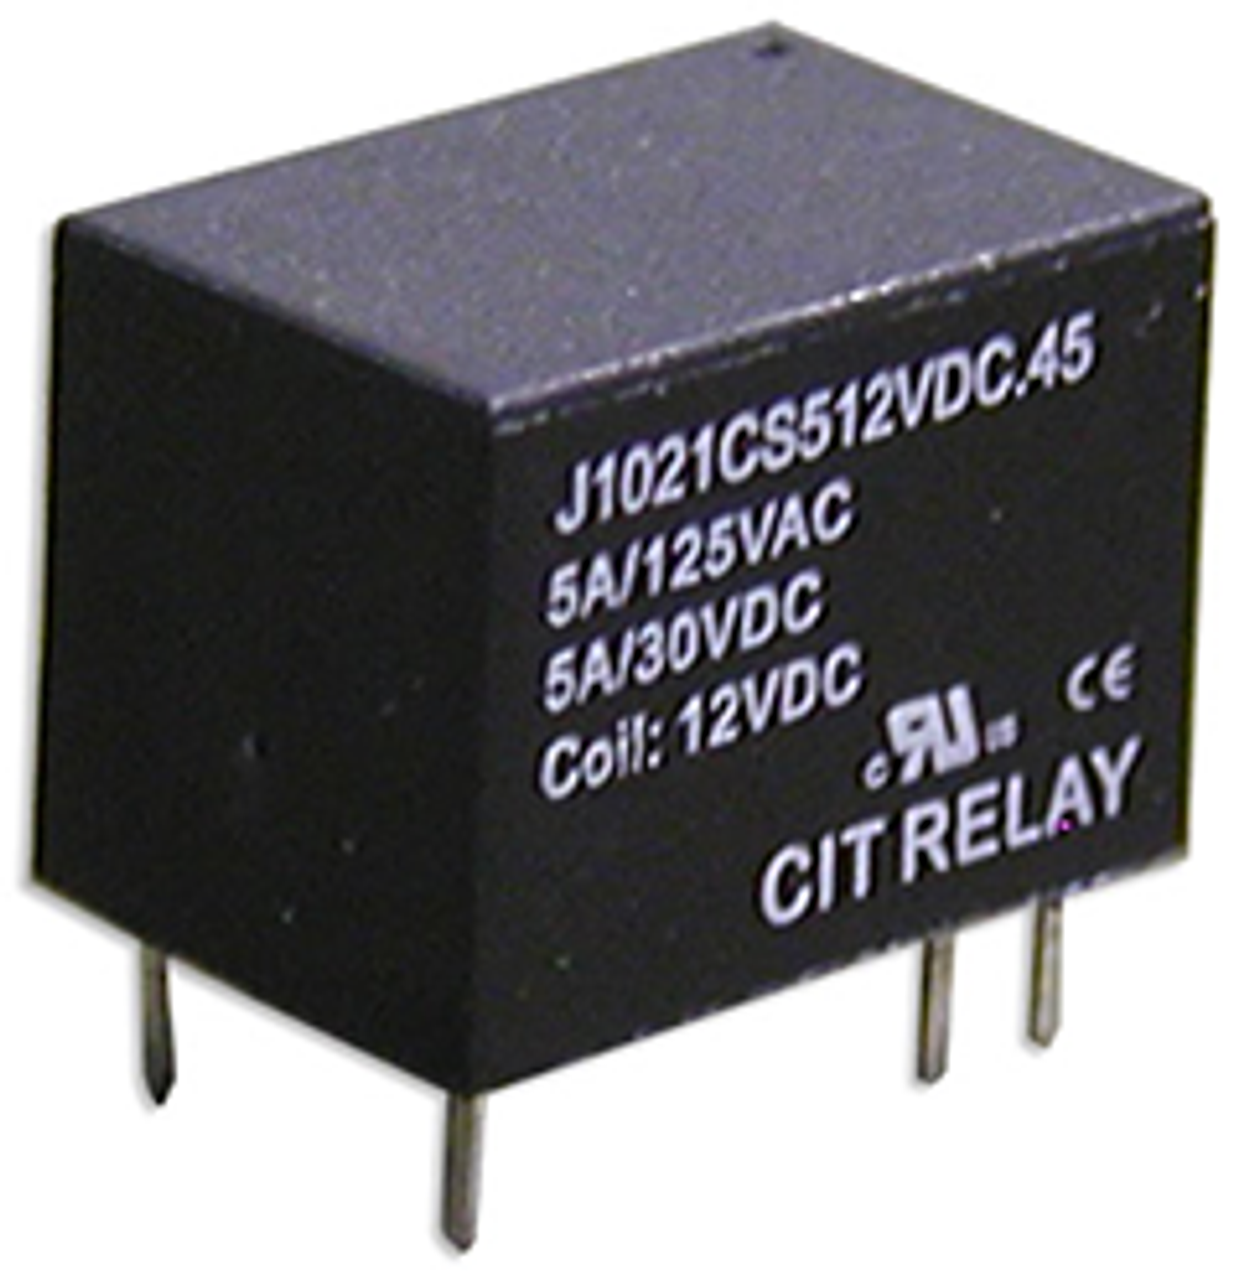 CIT Relay and Switch J1021BS3P3VDC.36 Power Relays